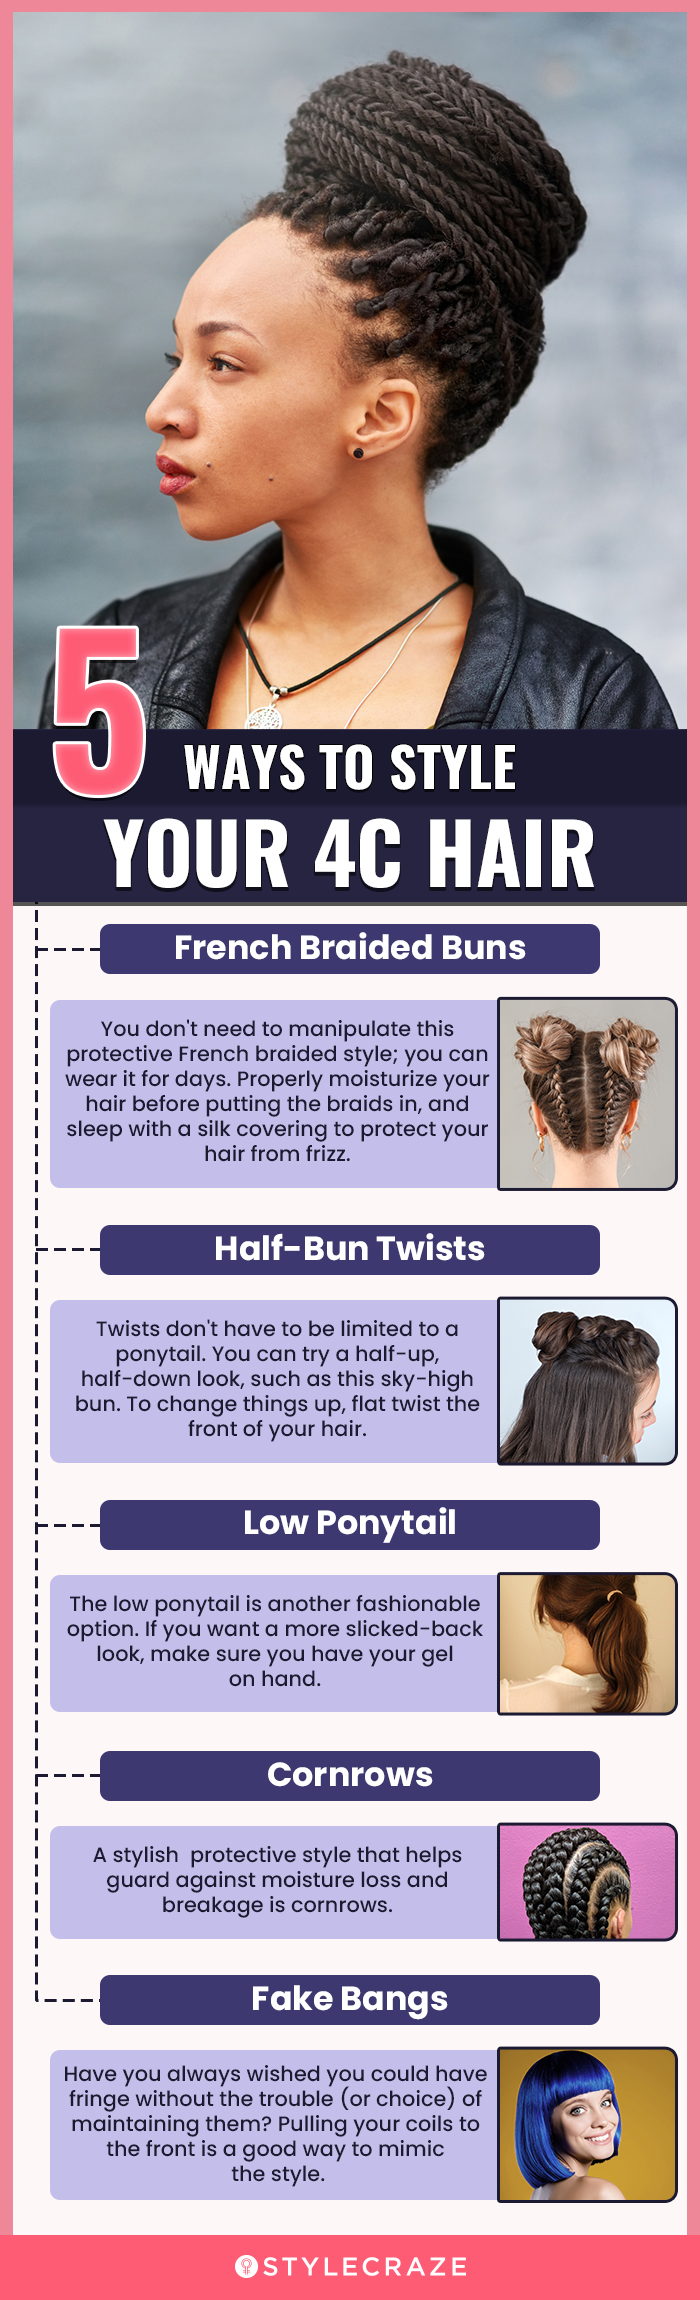 Ways To Style Your 4c Hair (infographic)